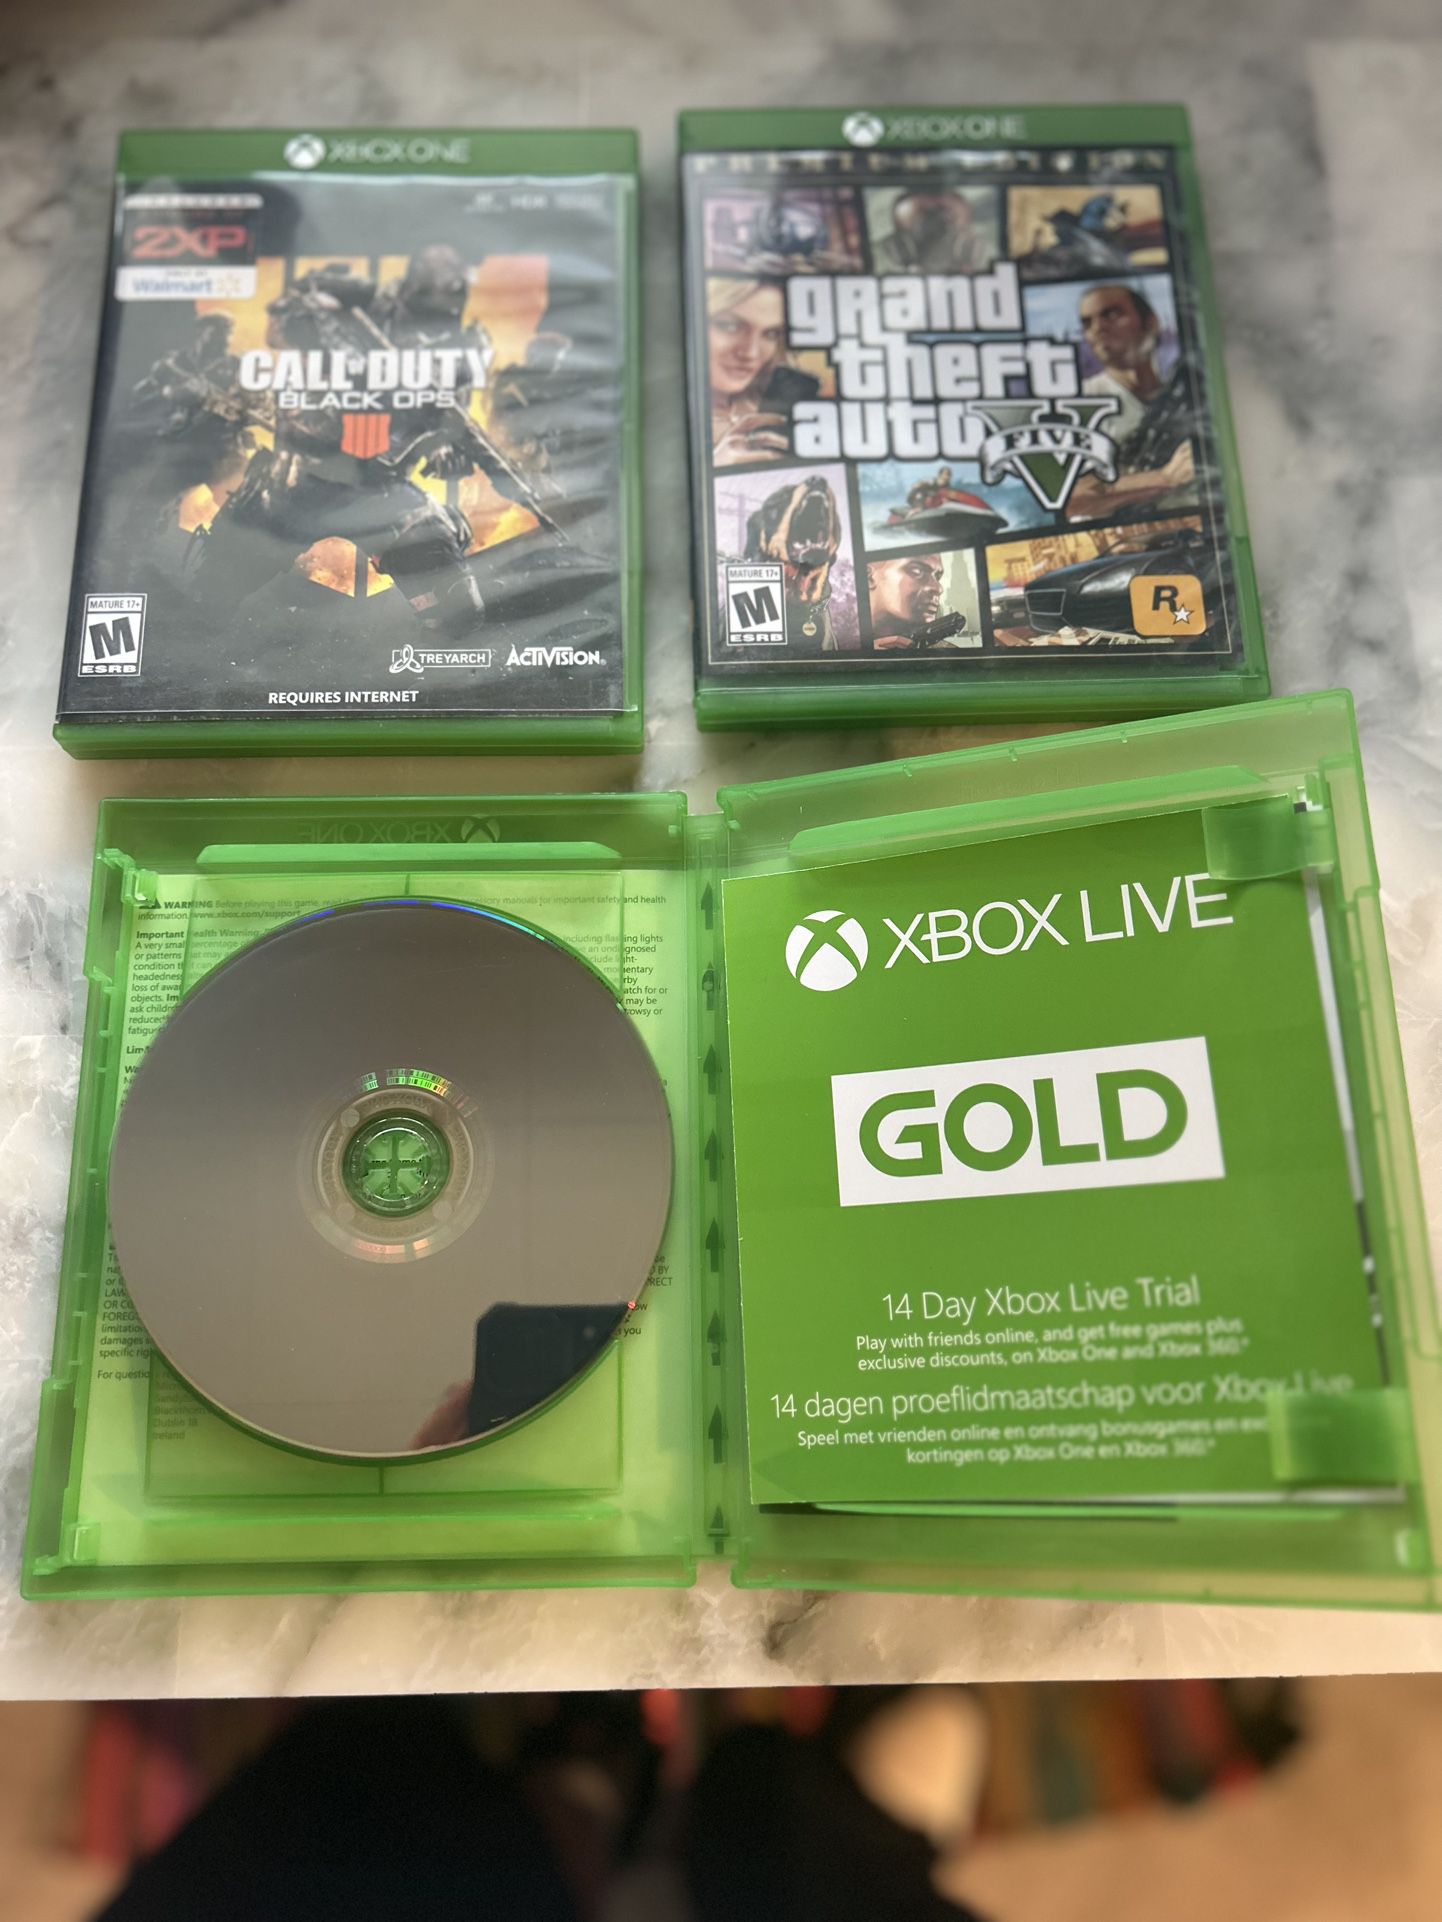 New - Xbox Series X w/ 3 Months of Ultimate Game Pass for Sale in Erie, PA  - OfferUp